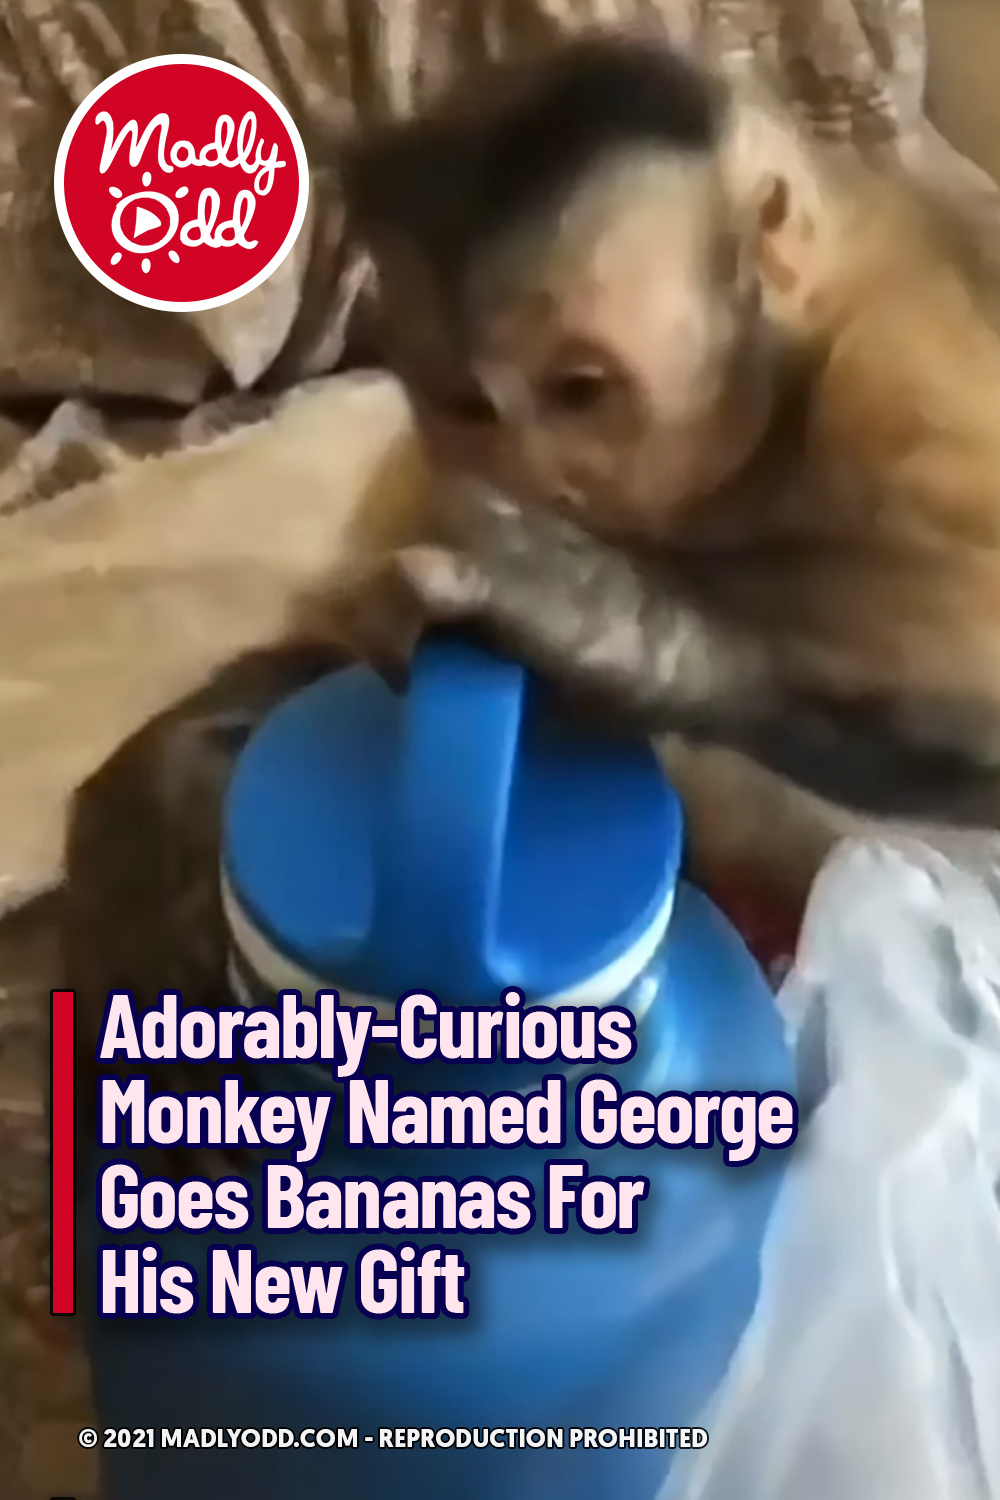 Adorably-Curious Monkey Named George Goes Bananas For His New Gift